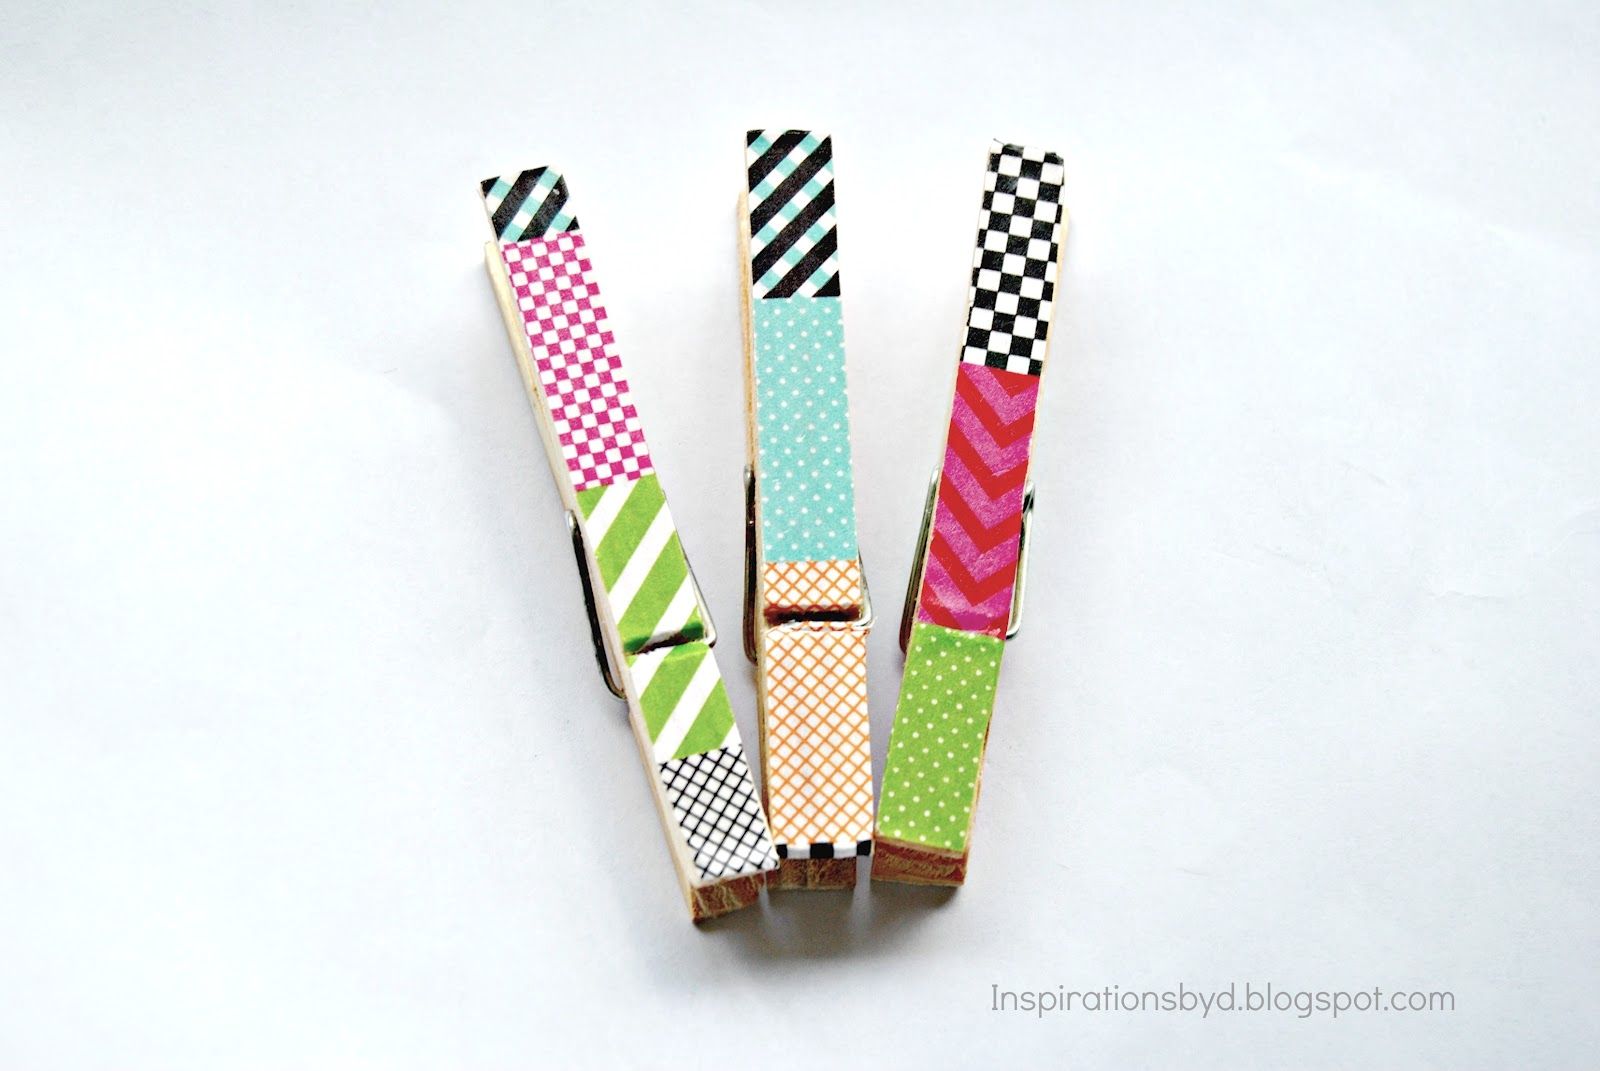 Inspirations by D: How to Decorate Clothes Pins